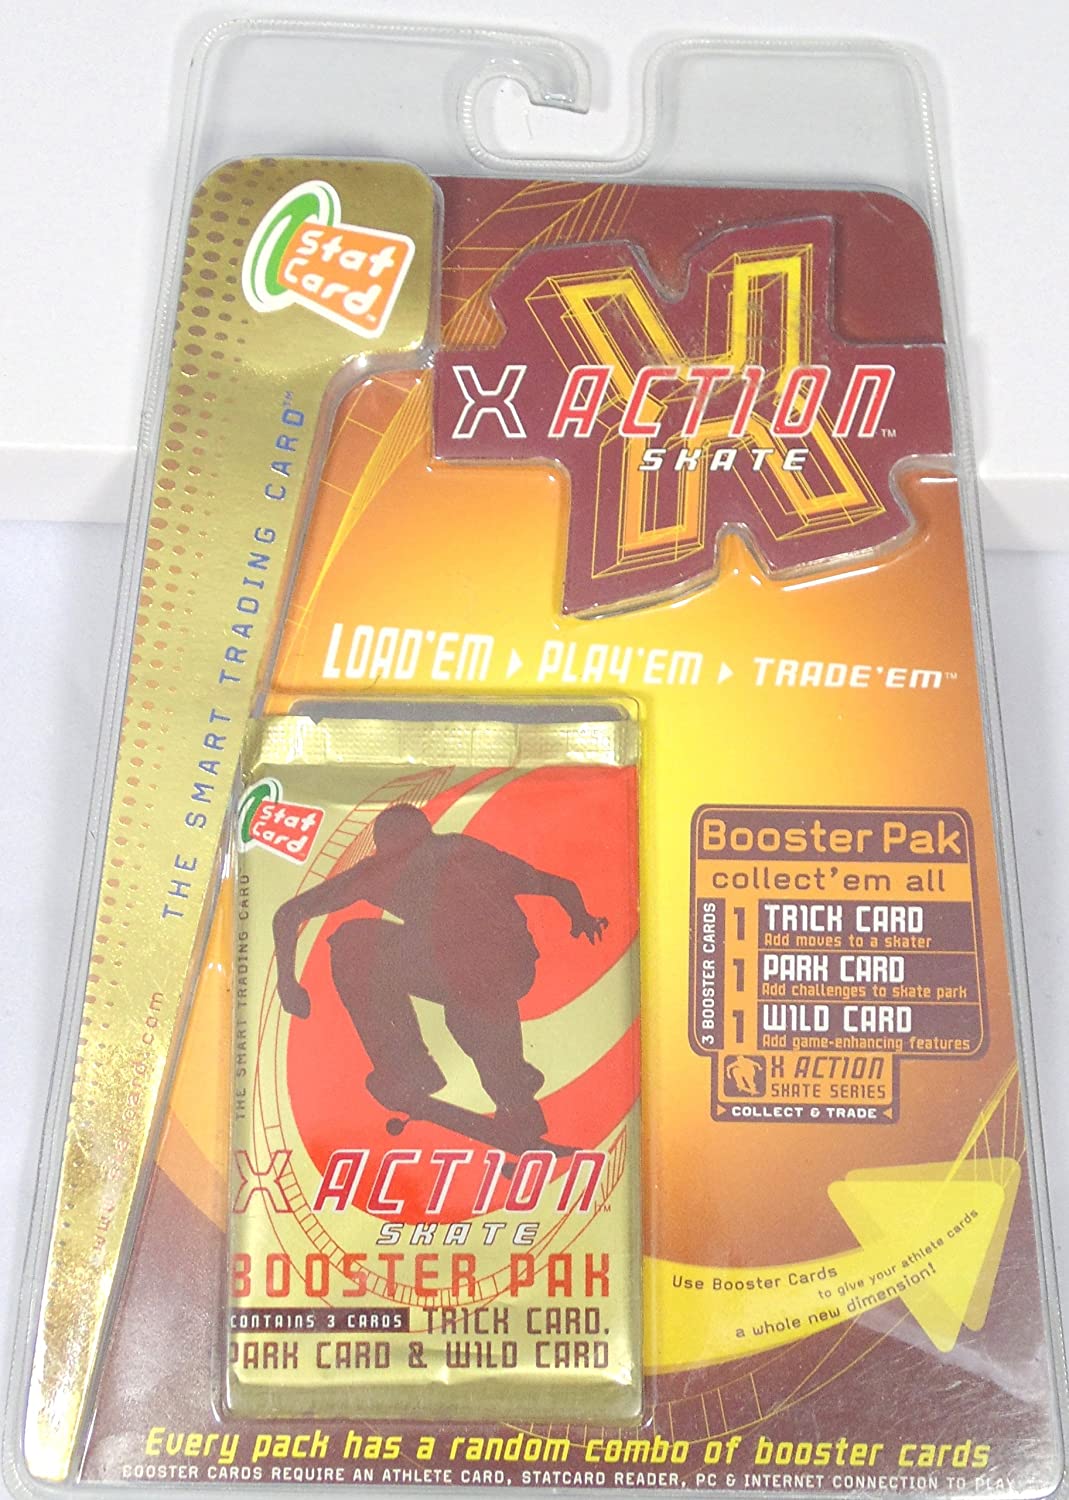 X Action Skateboarding Stat Card Booster Pak Trading Cards, Set of 3